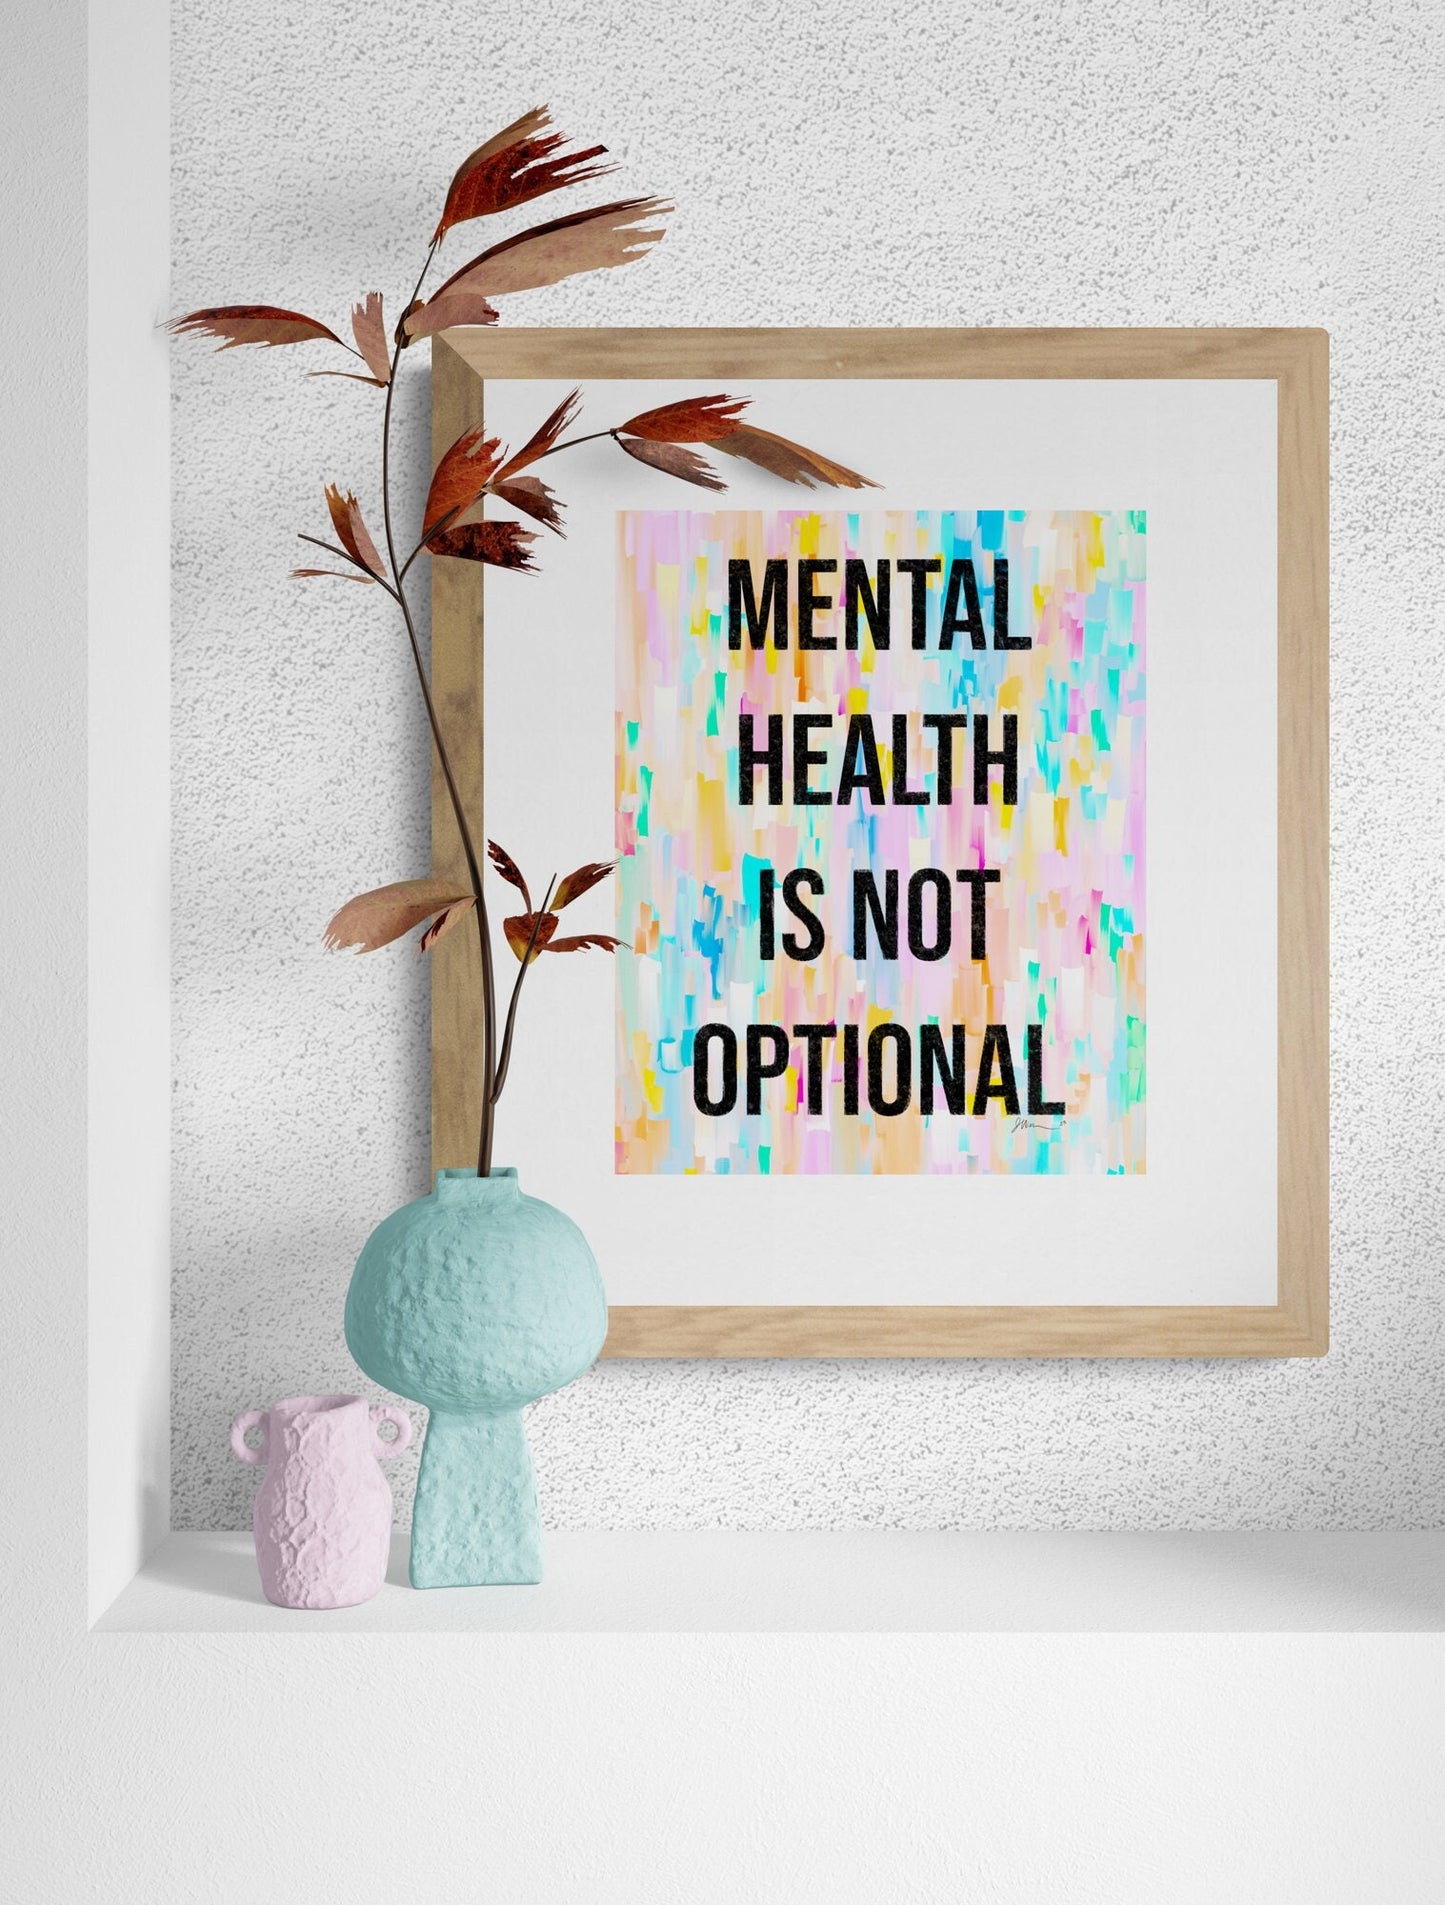 Mental Health Is Not Optional Inspirational Giclée Print 8” x 10” with Colorful Abstract Background